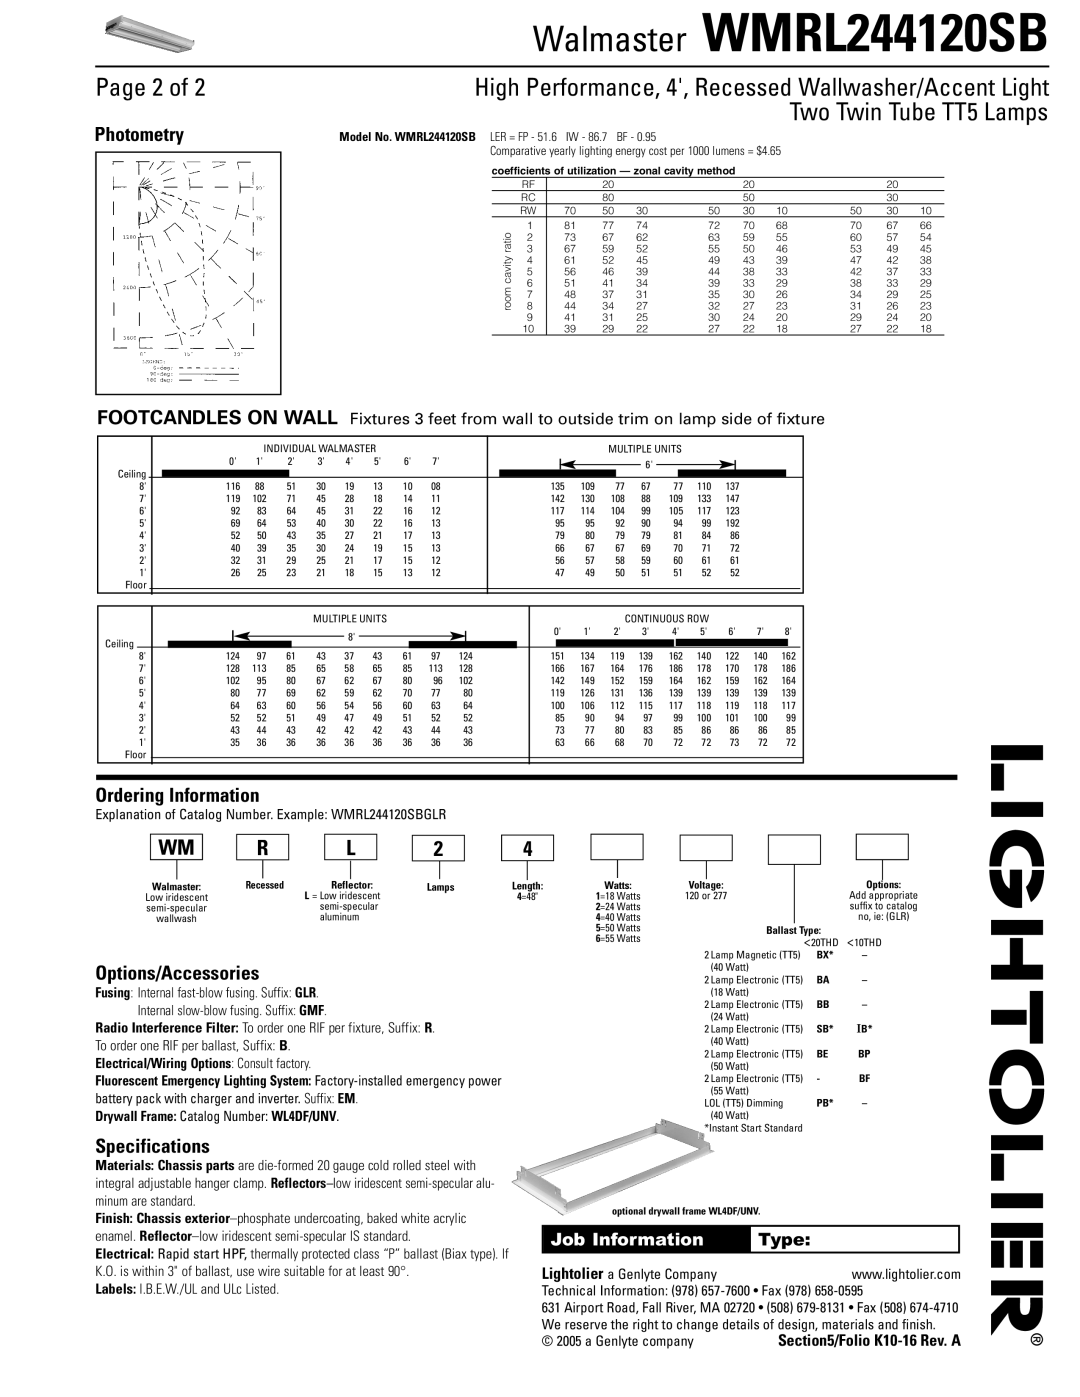 Lightolier WMRL244120SB Page 2 of, Two Twin Tube TT5 Lamps, Photometry, Ordering Information, Options/Accessories, Type 